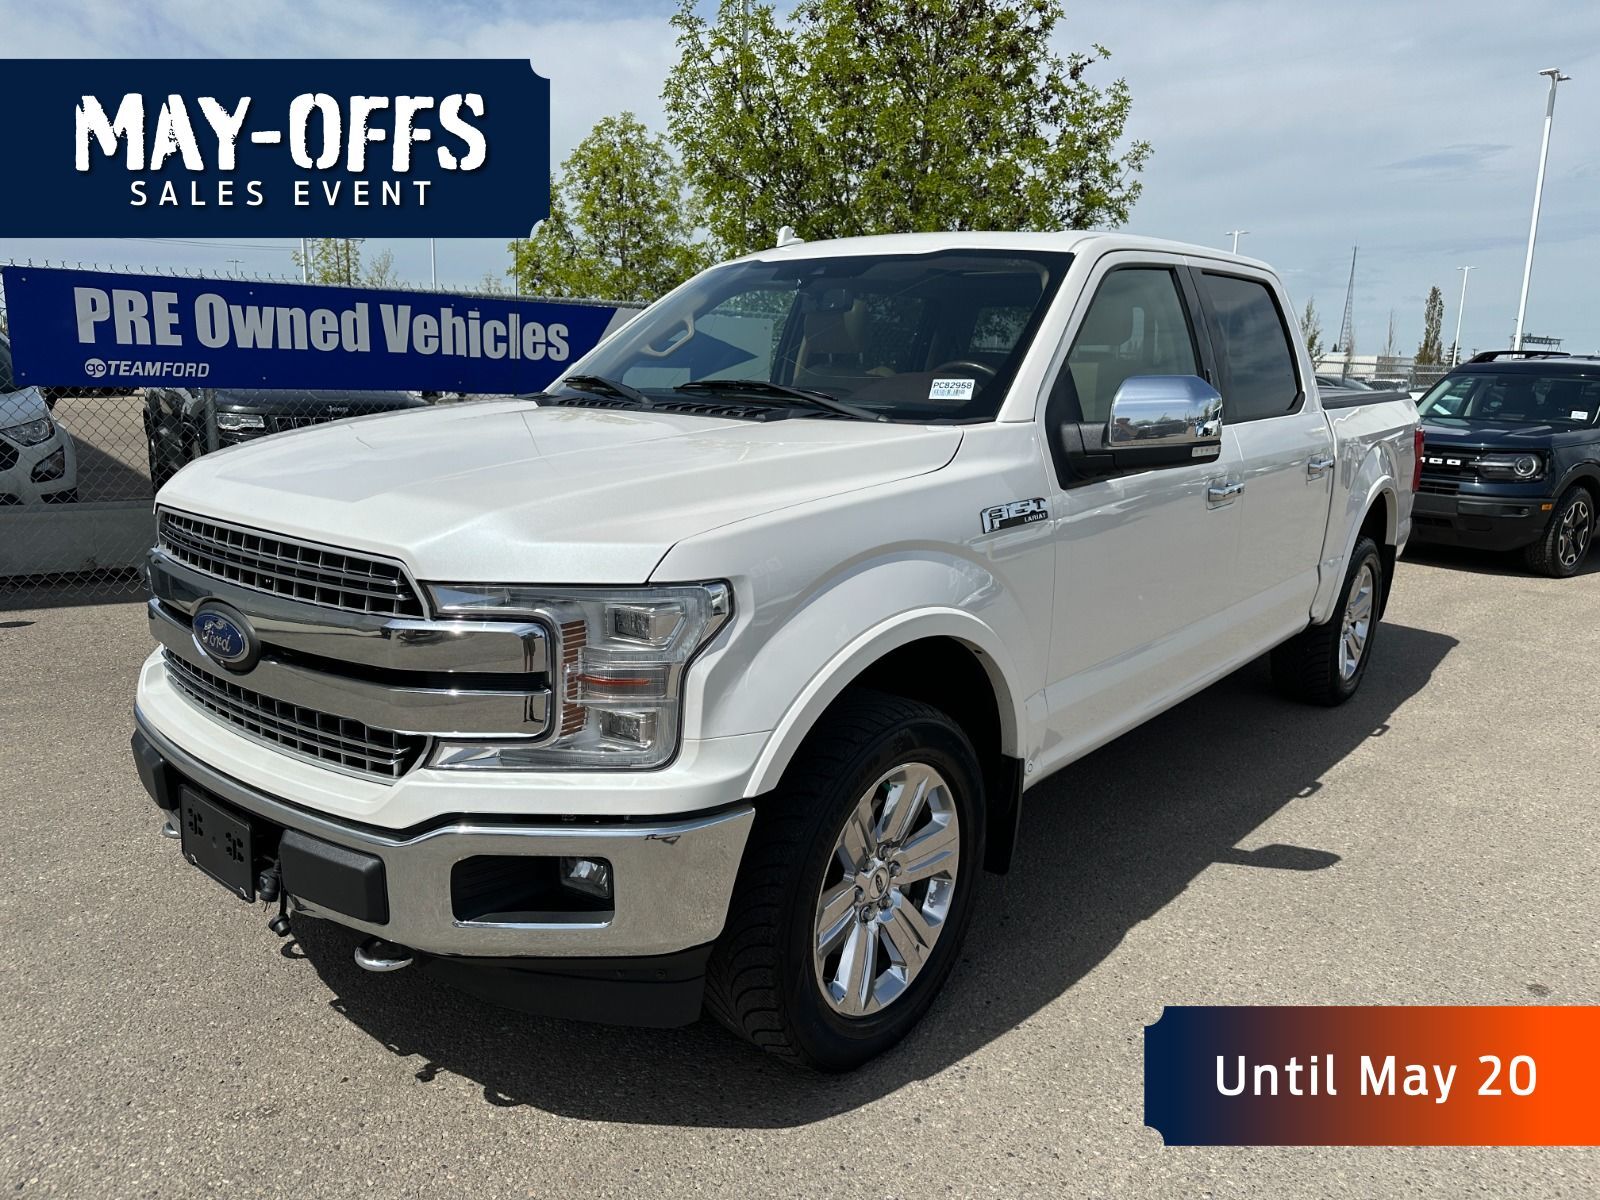 2018 Ford F-150 3.5L V6 ECOBOOST ENG, LARIAT, TWIN MOONROOF, TECH 